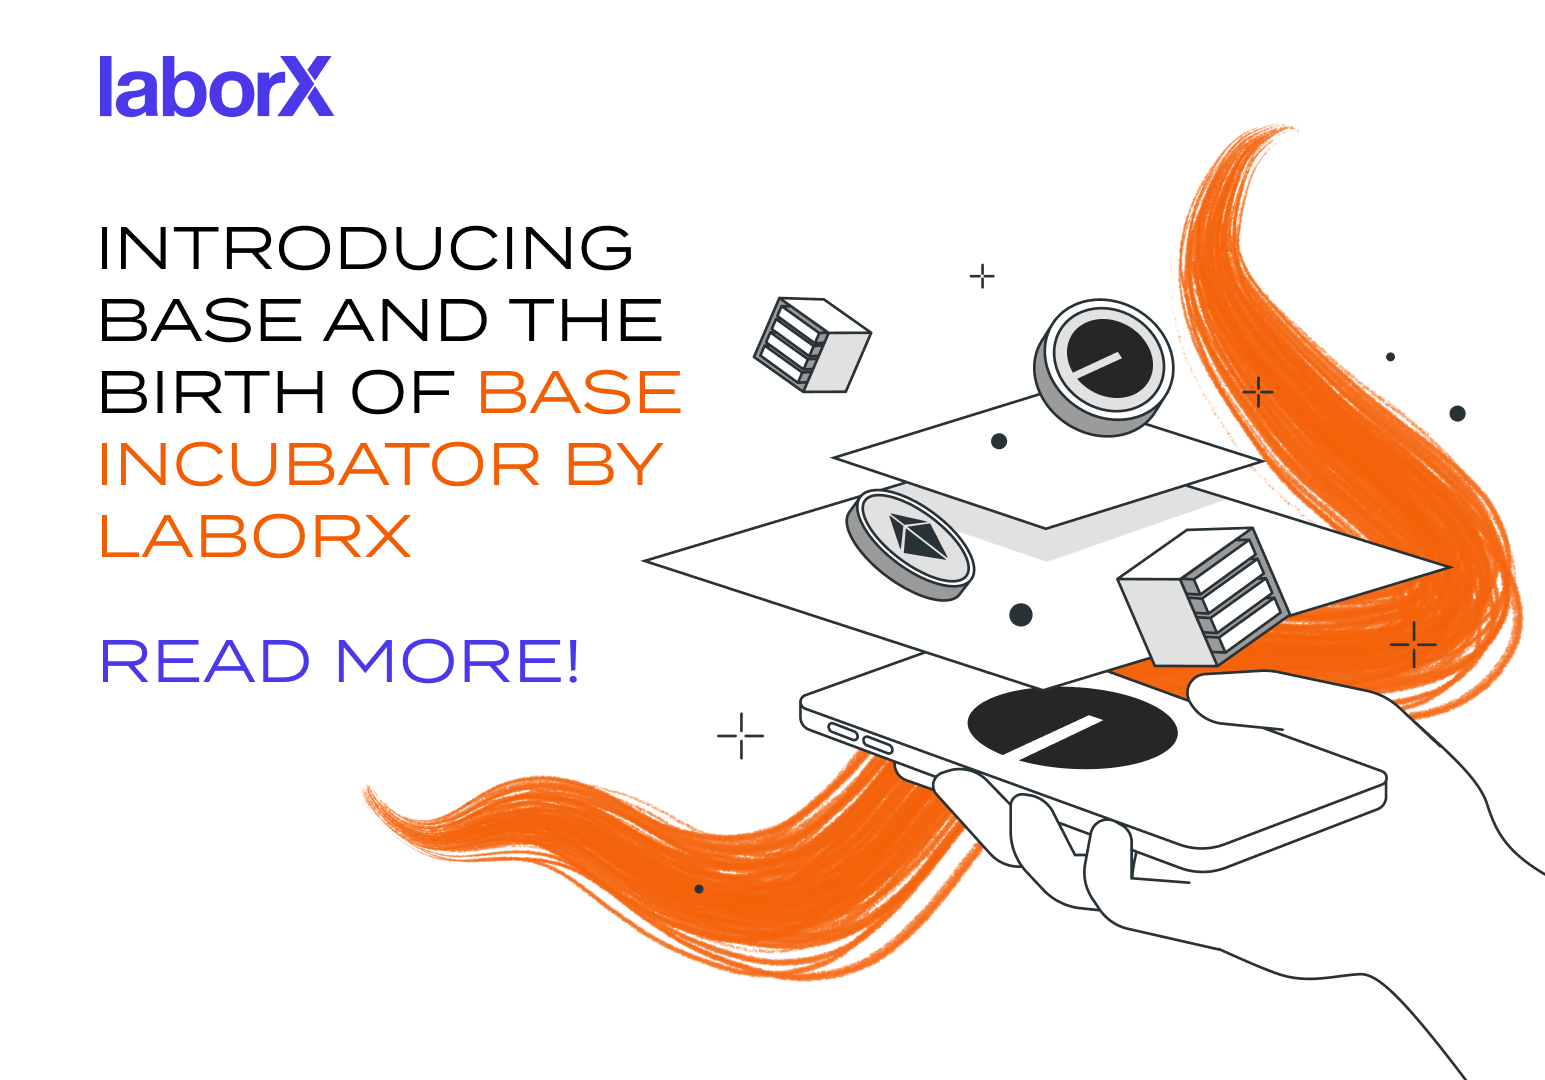 Introducing Base and the Birth of Base Incubator by LaborX